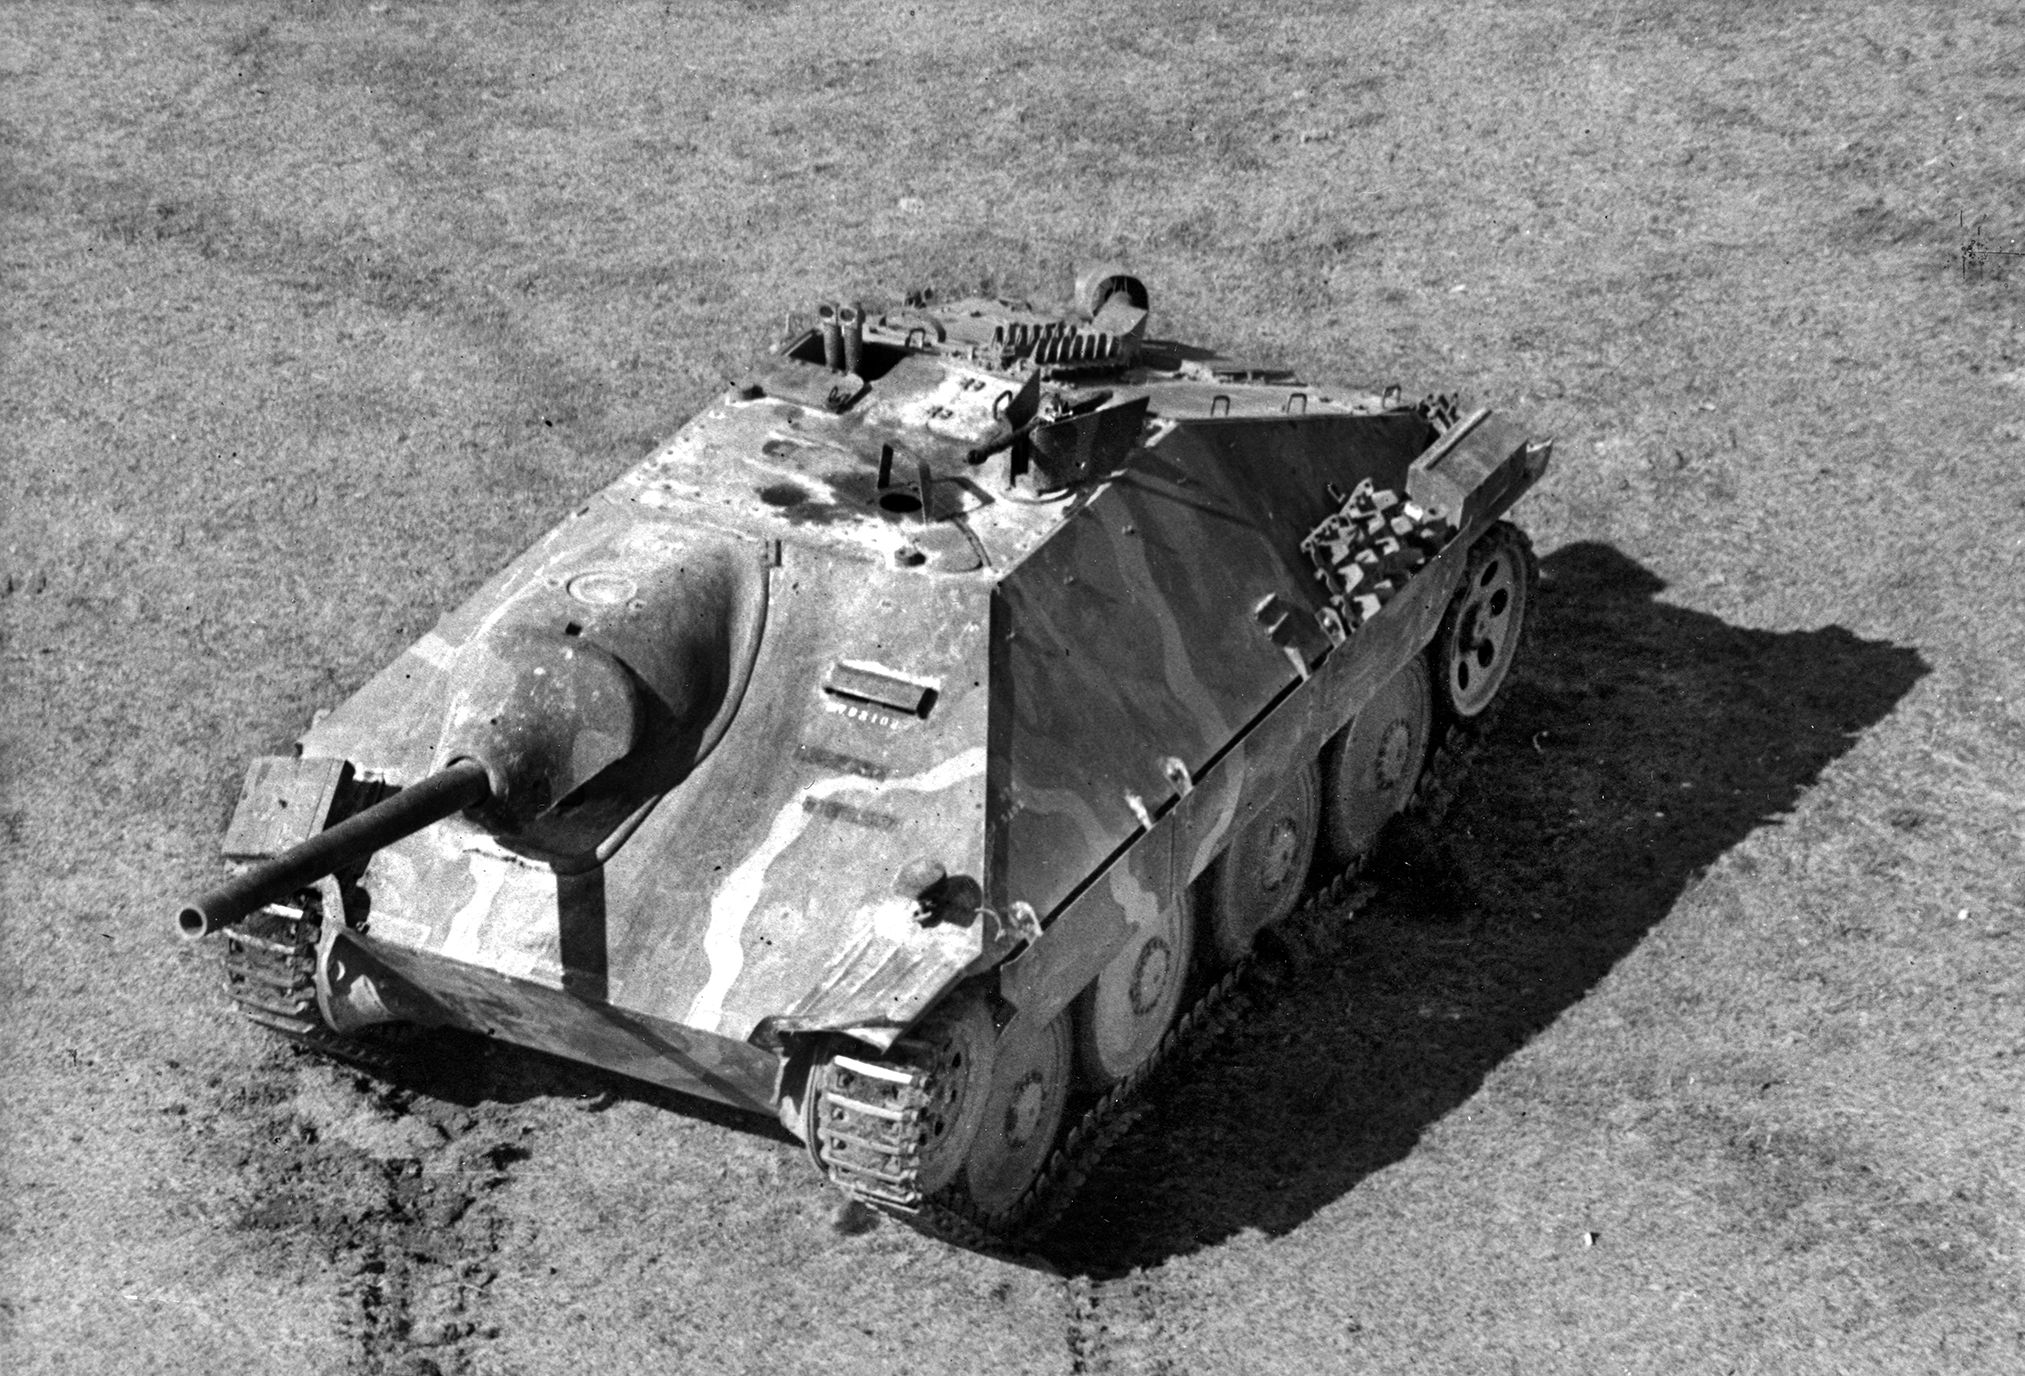 The compact Jagdpanzer, just under 7 feet tall, was most effective firing its armor-piercing and high-explosive shells at the flanks of enemy armored formations from hidden positions.